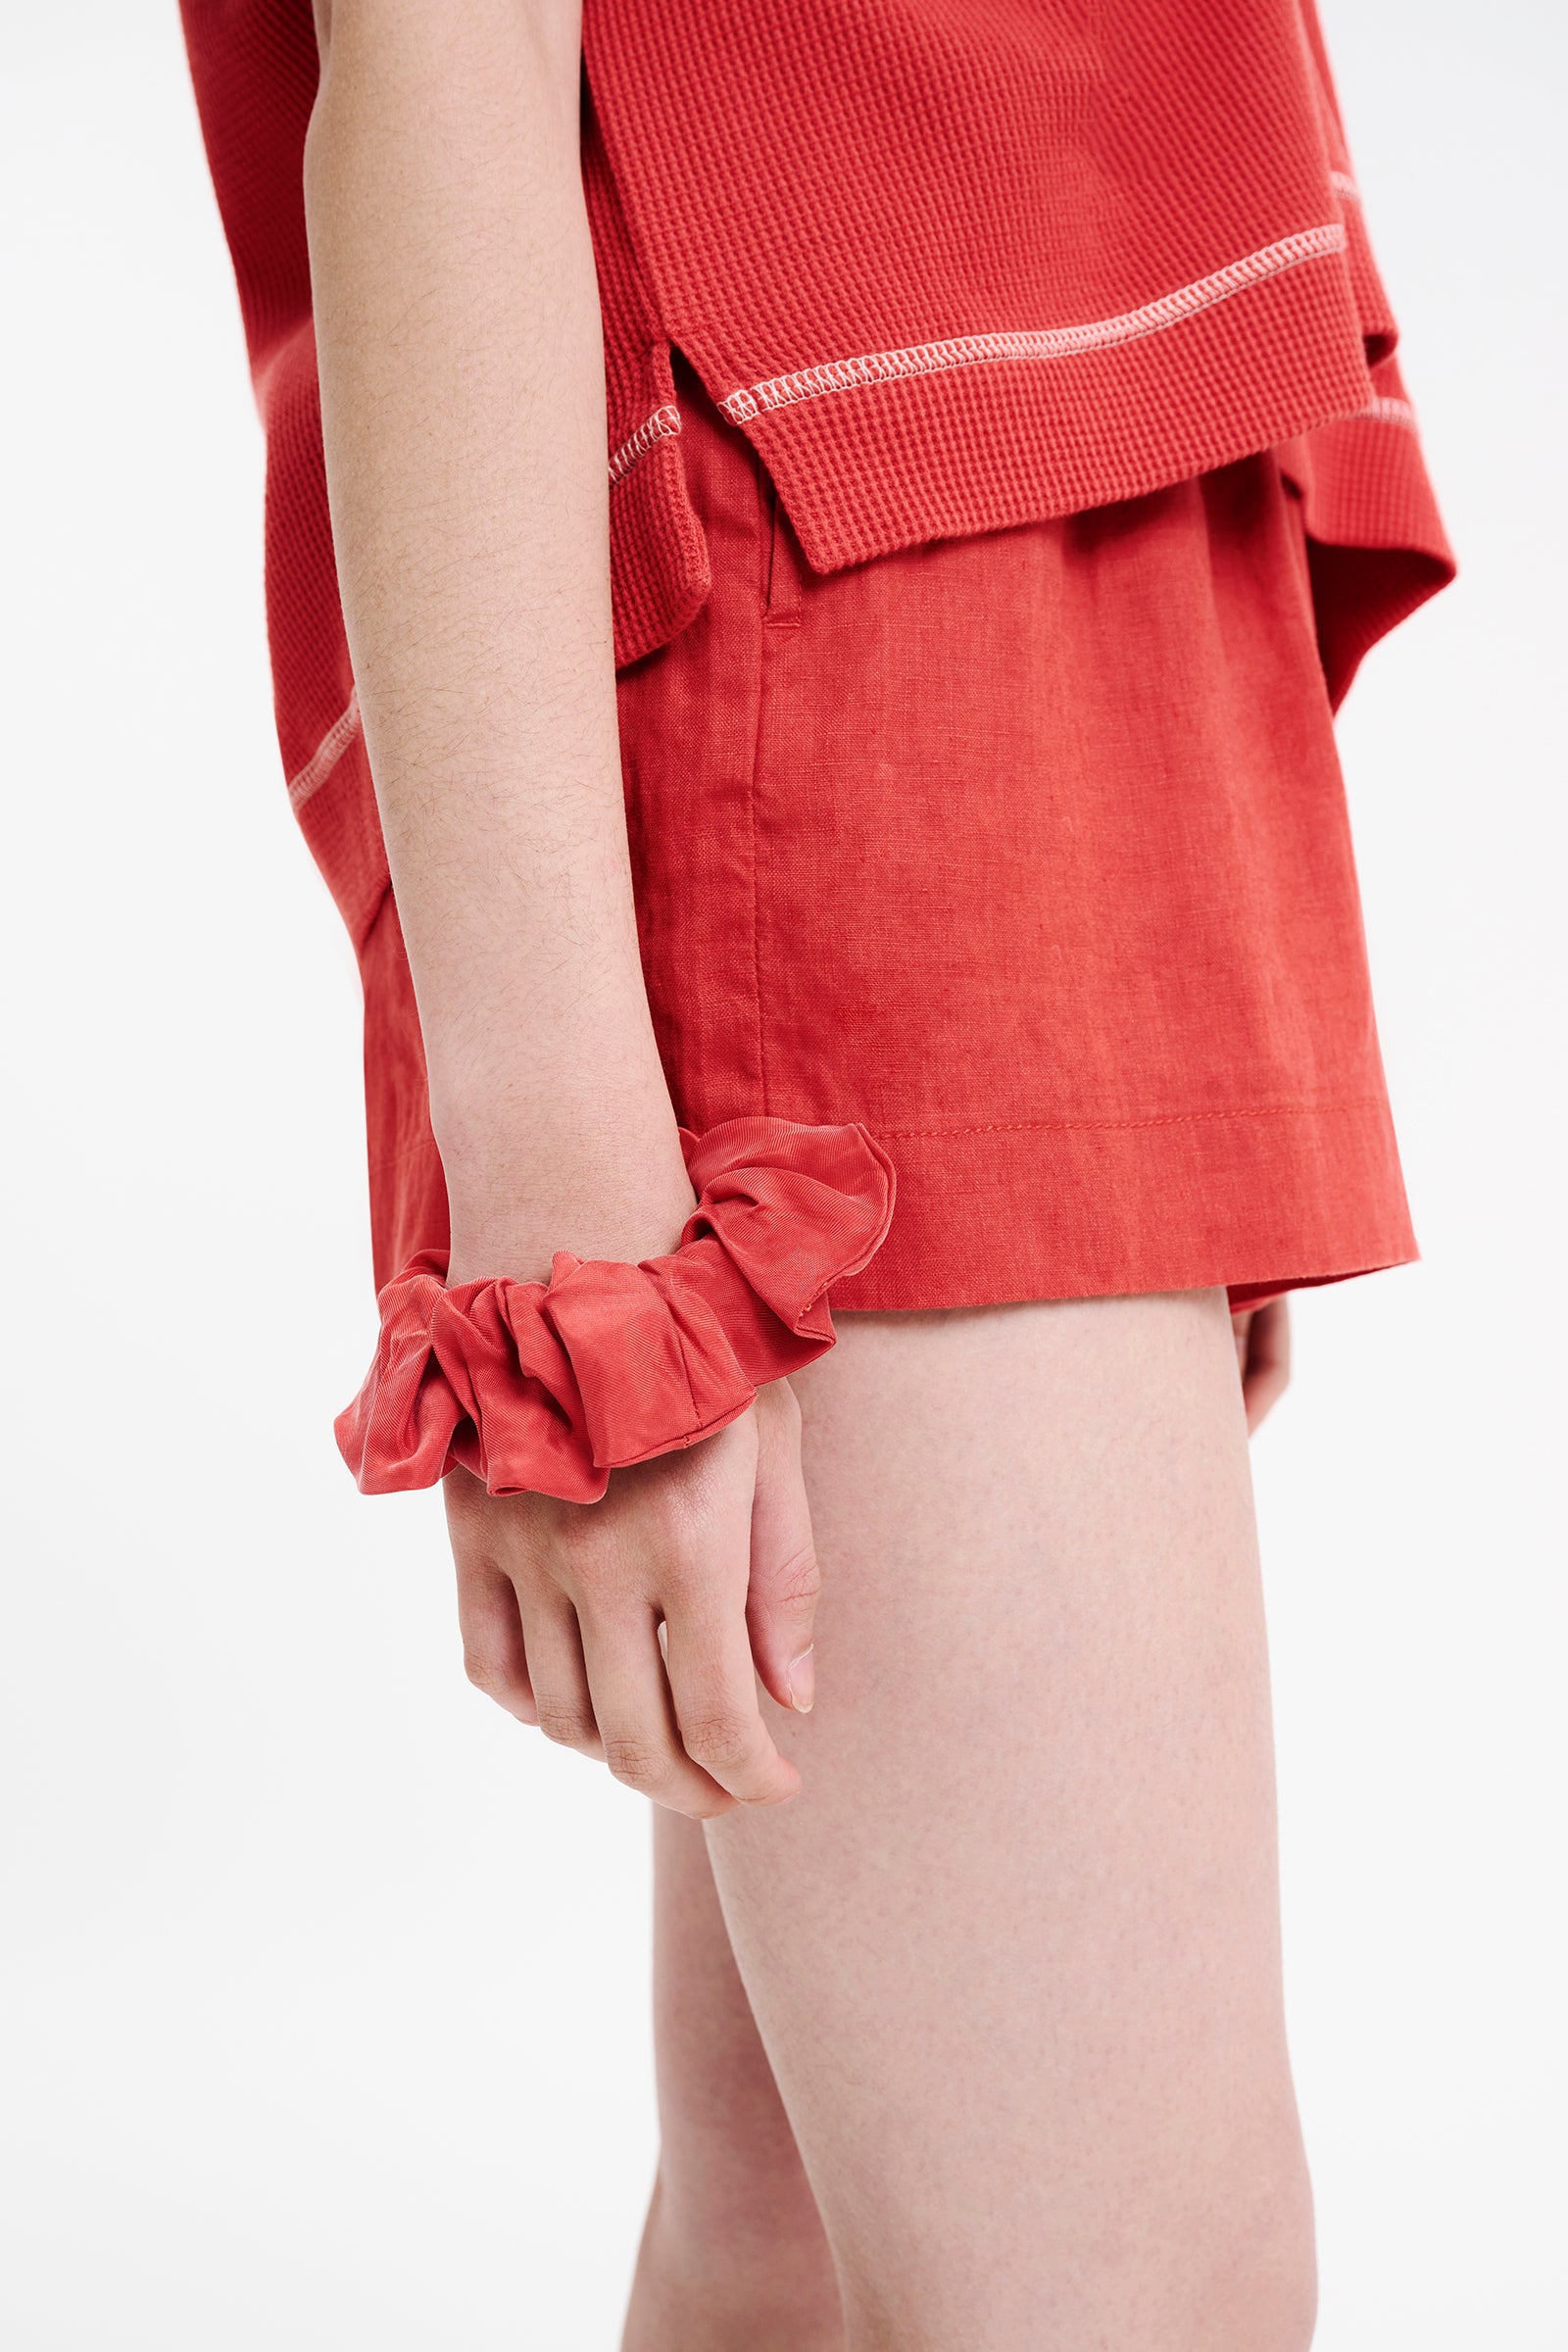 Nude Lucy Essential Cupro Scrunchie in a Pink & Orange Toned Coral Colour